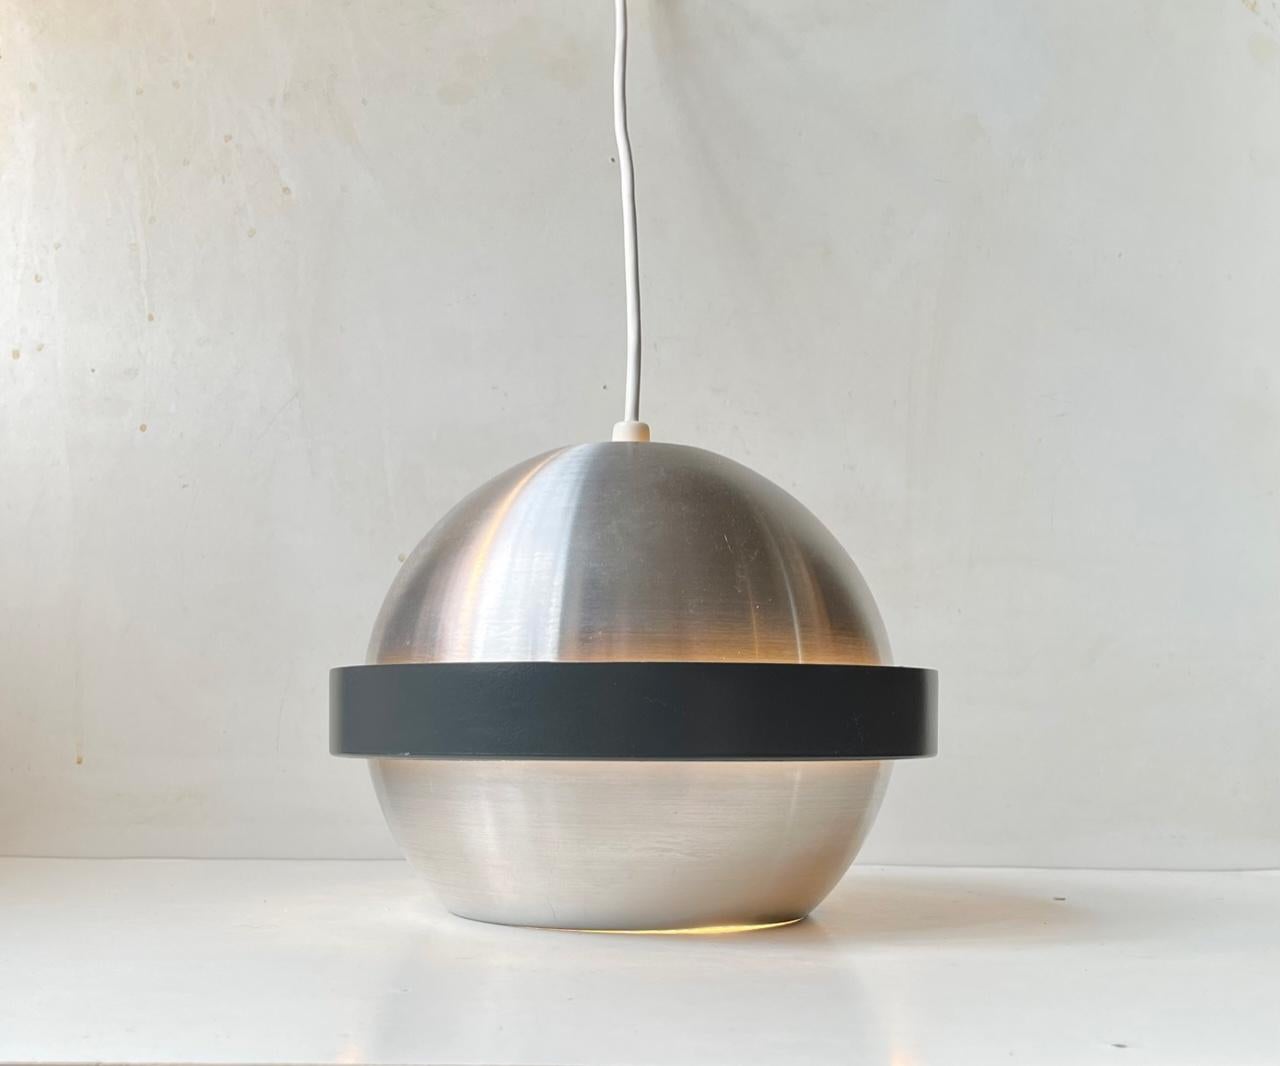 Hanging light in brushed aluminium micmic'ing the planet Saturn. Its matte black ring diffuses the light softly around the perimeter. It was designed and made by Fagerhult in Sweden during the 1970s. It closely resembles designs by Jo Hammerborg for